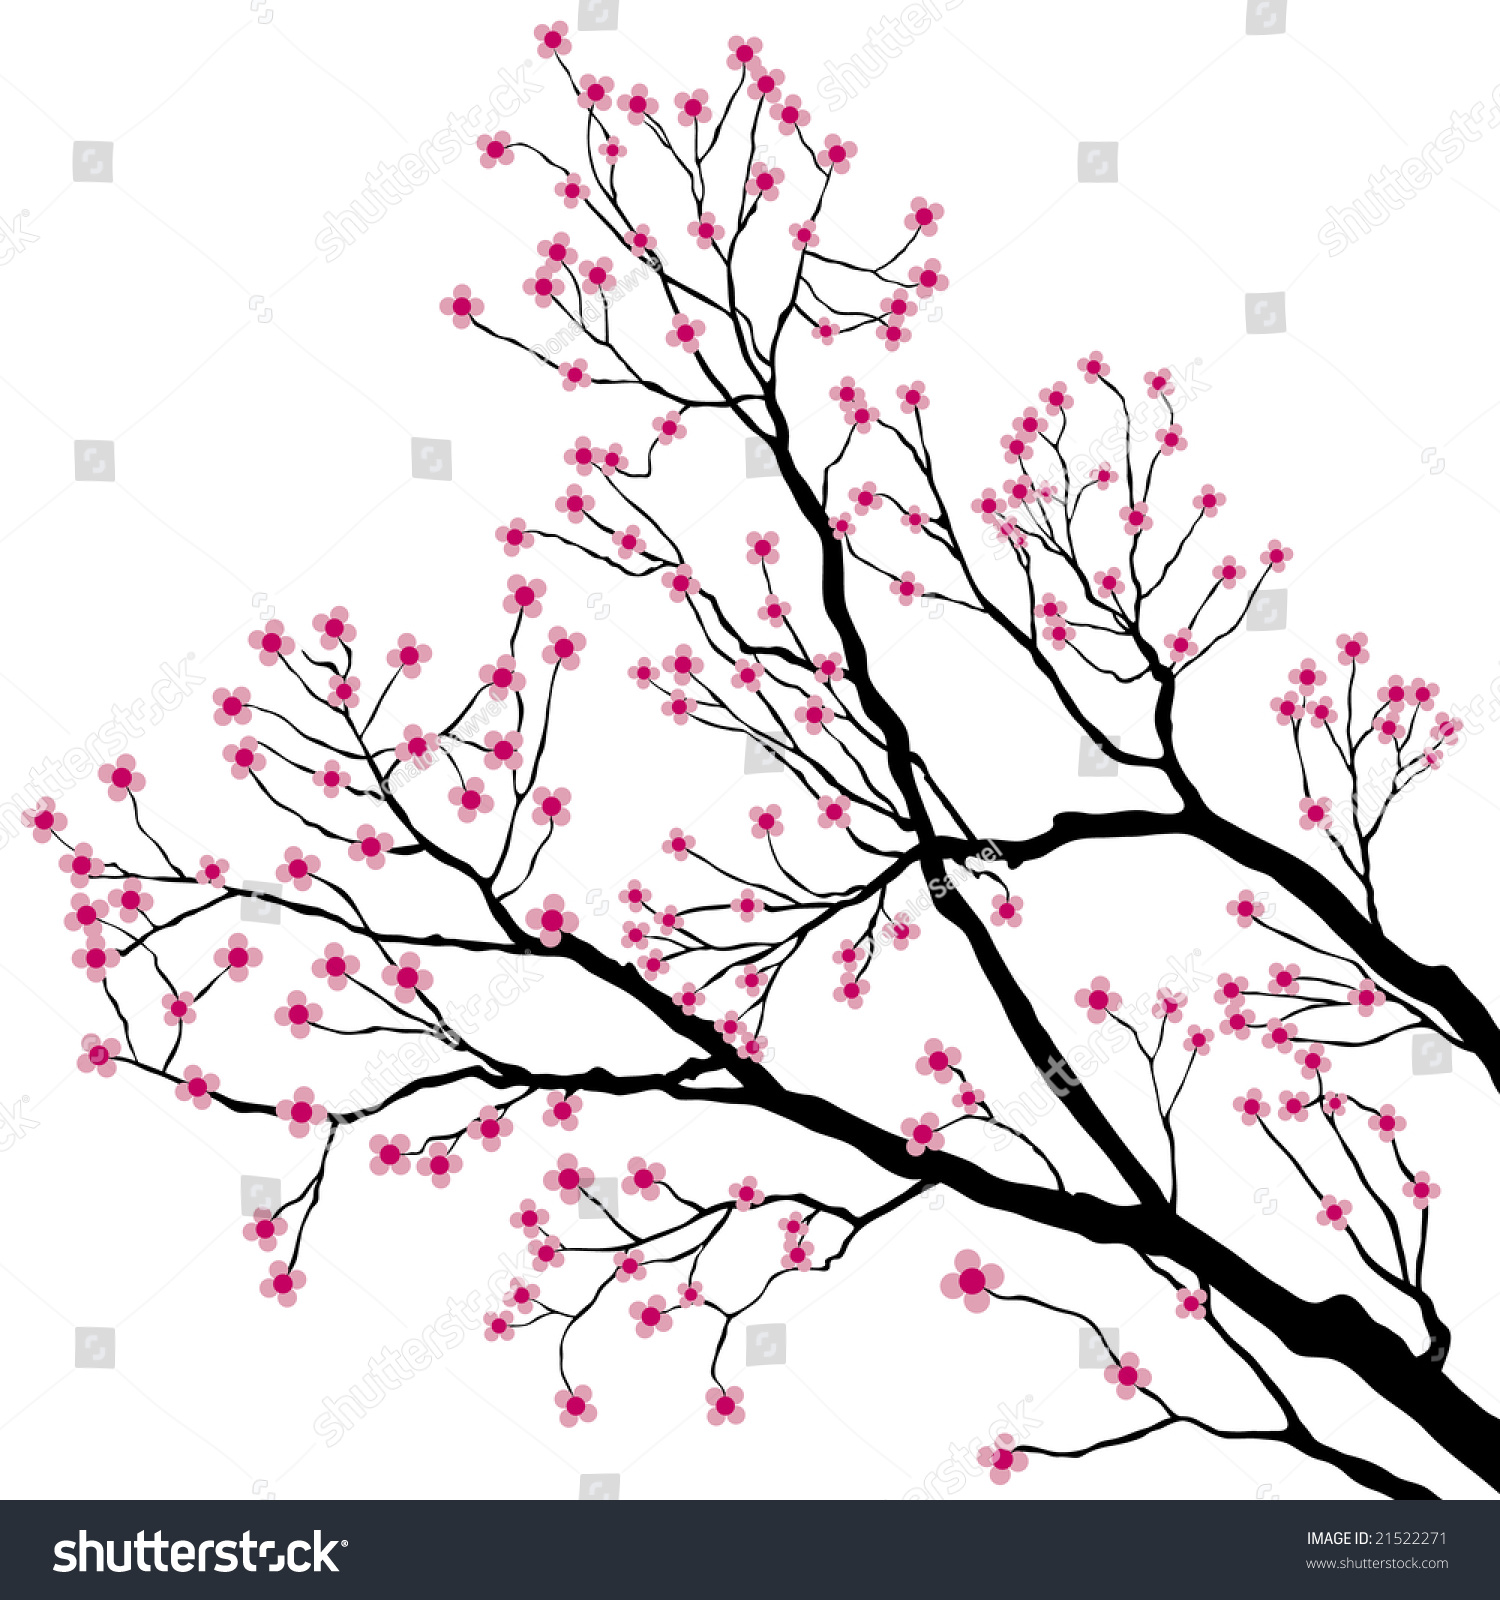 Tree Branches With Pink Flowers Stock Photo 21522271 : Shutterstock